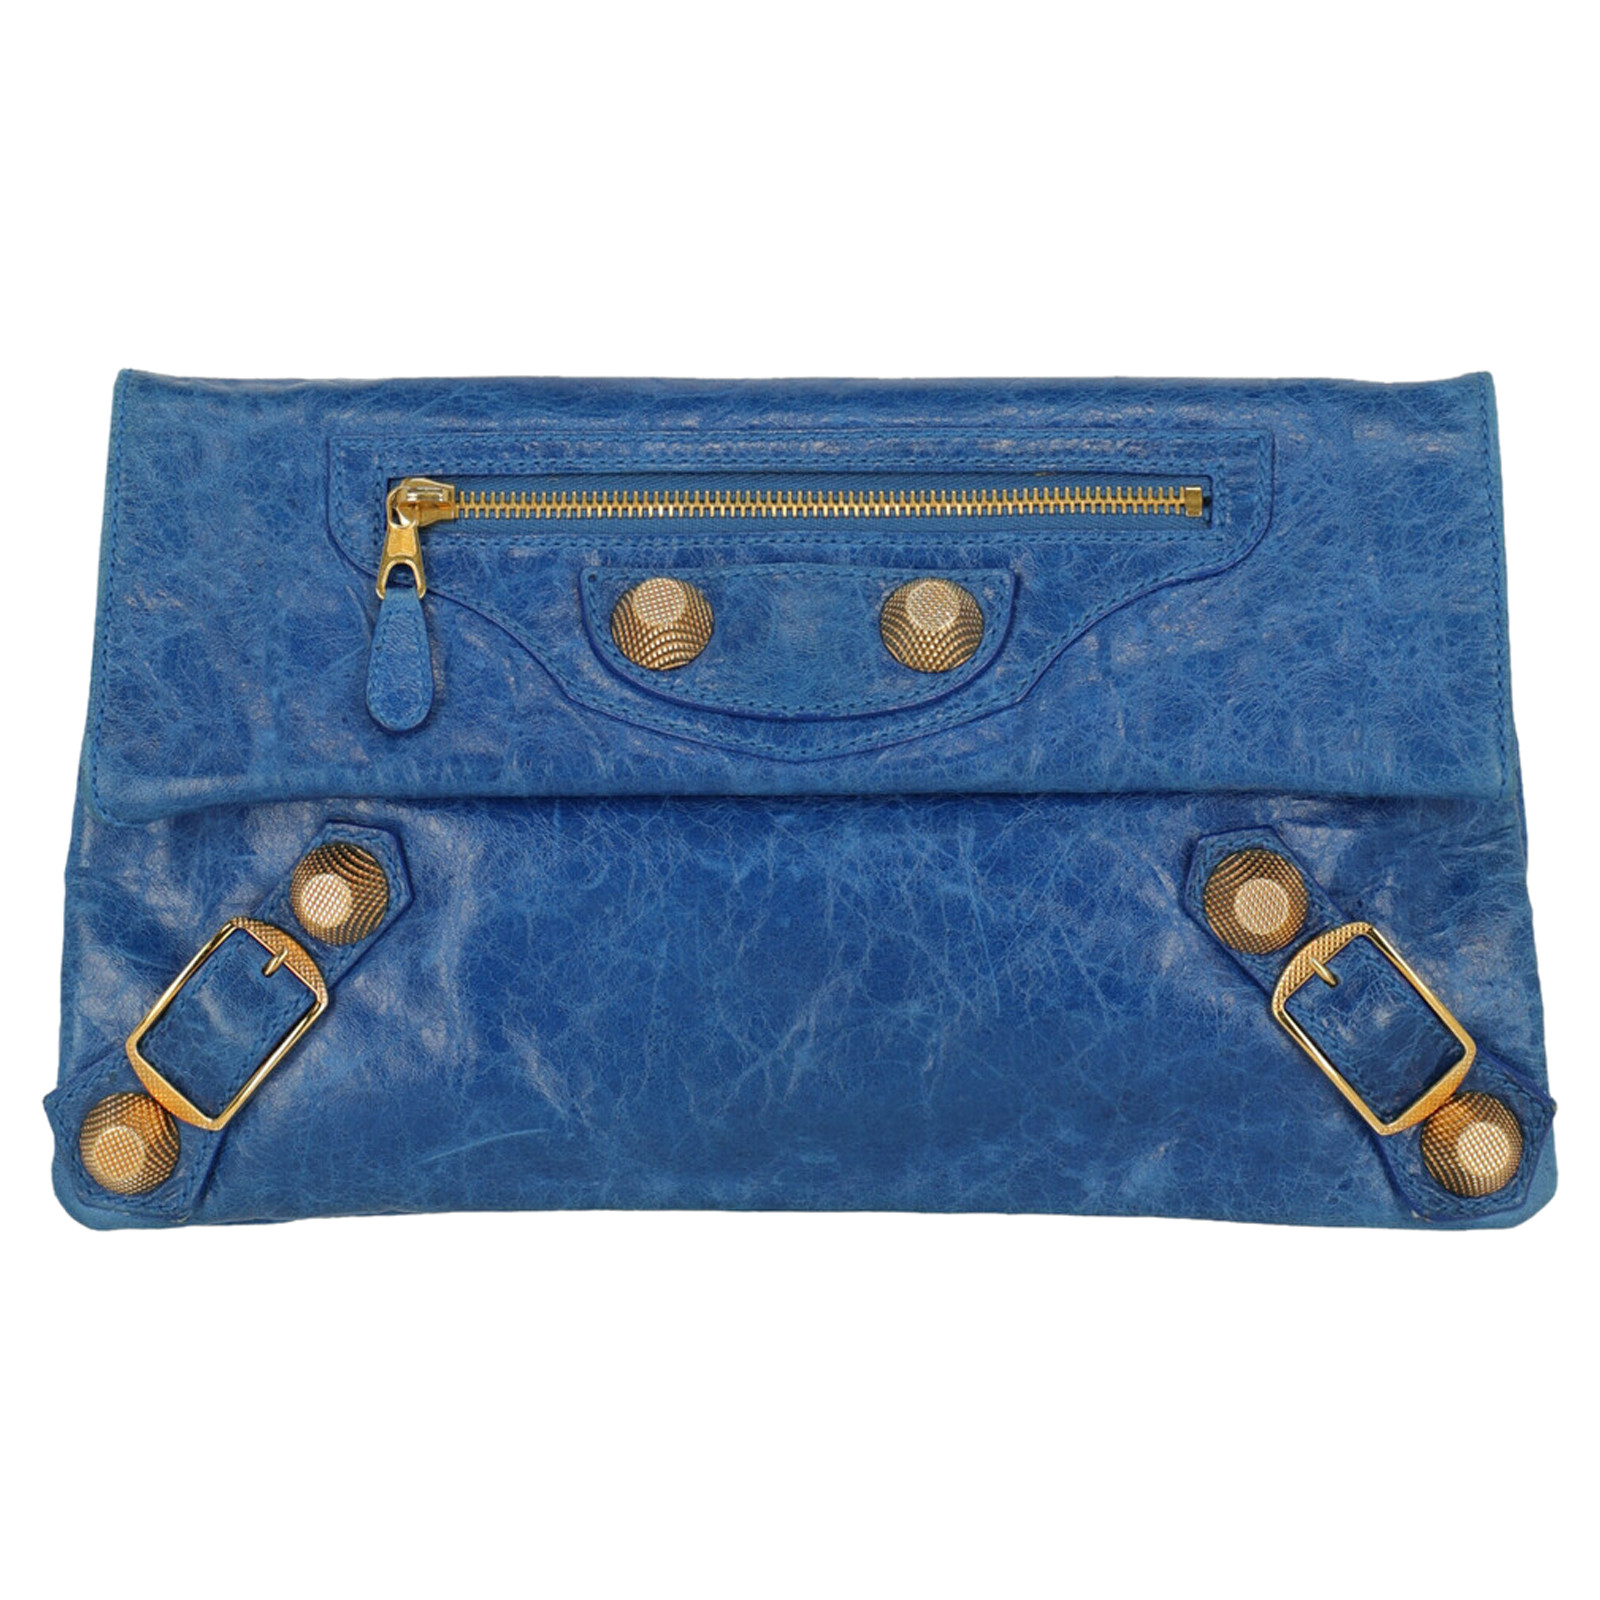 Balenciaga Clutch Bag Leather in Blue - Second Hand Balenciaga Clutch Bag Leather in Blue buy used for 405€